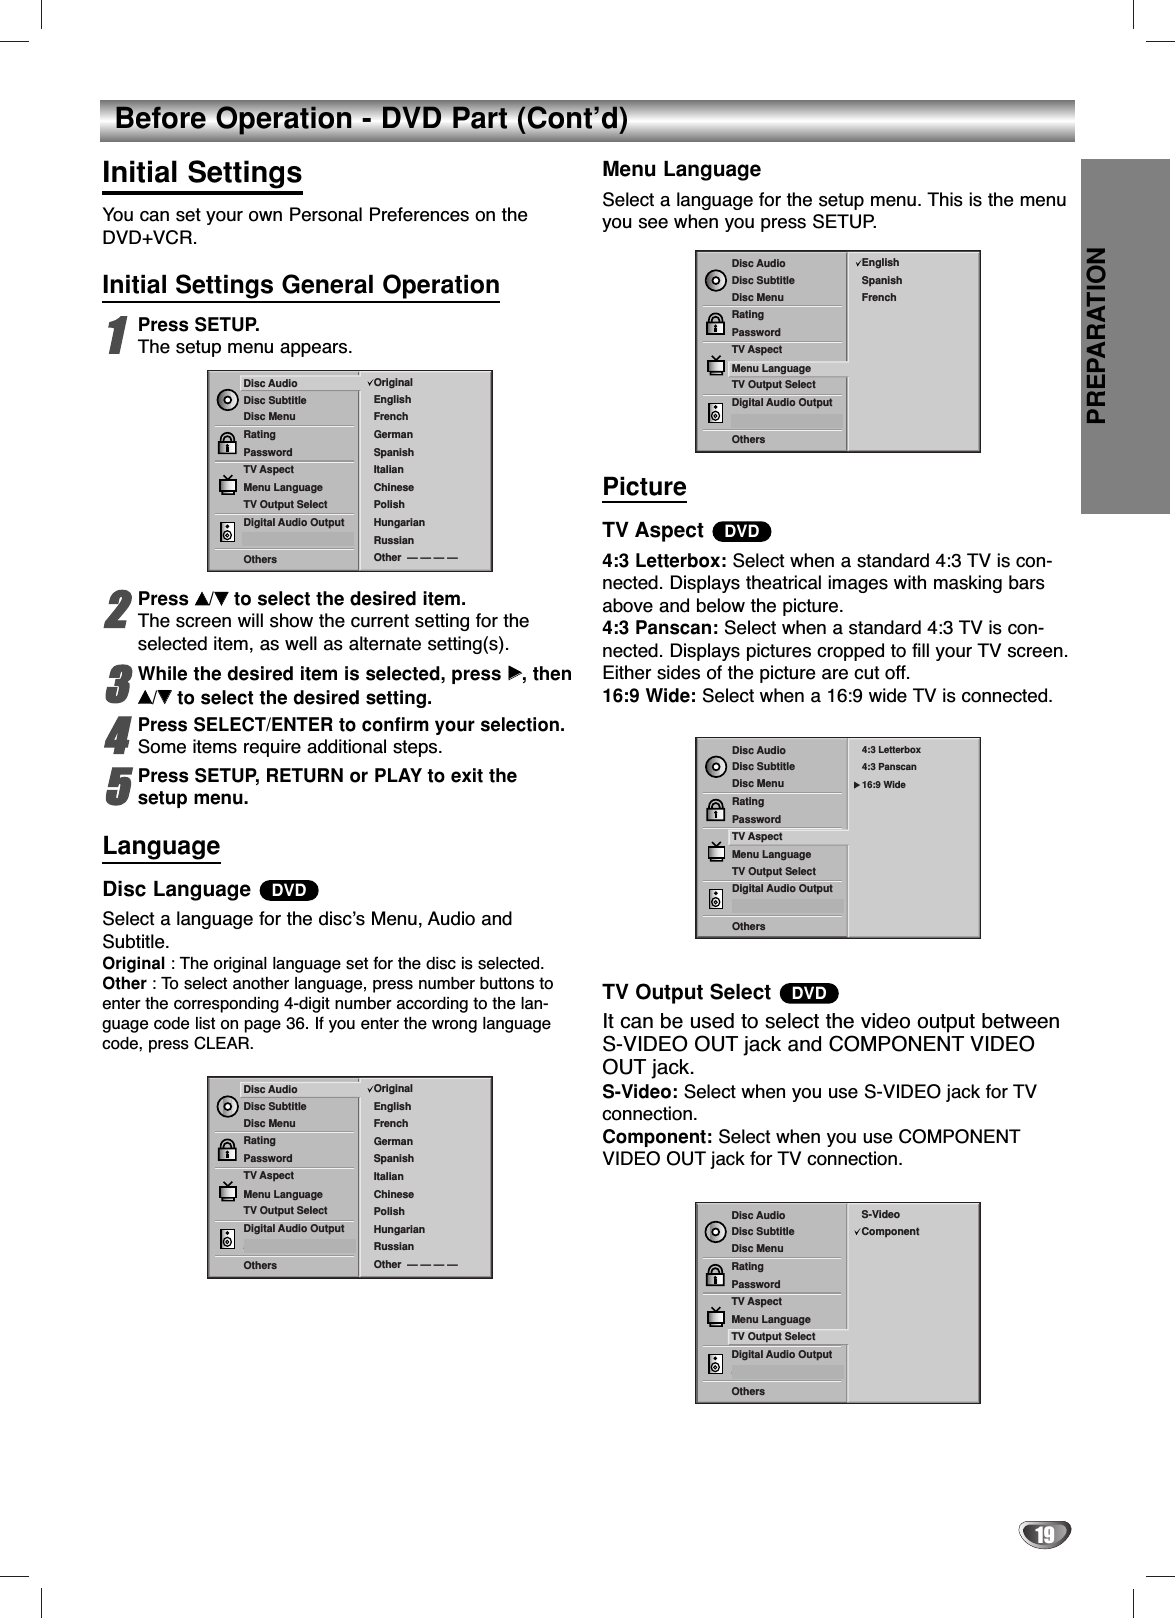 PREPARATION19Before Operation - DVD Part (Cont’d)Initial SettingsYou can set your own Personal Preferences on theDVD+VCR.Initial Settings General Operation11Press SETUP.The setup menu appears.22Press vv/VVto select the desired item.The screen will show the current setting for theselected item, as well as alternate setting(s).33While the desired item is selected, press BB, thenvv/VVto select the desired setting.44Press SELECT/ENTER to confirm your selection.Some items require additional steps.55Press SETUP, RETURN or PLAY to exit thesetup menu.LanguageDisc Language Select a language for the disc’s Menu, Audio andSubtitle.Original : The original language set for the disc is selected.Other : To select another language, press number buttons toenter the corresponding 4-digit number according to the lan-guage code list on page 36. If you enter the wrong languagecode, press CLEAR.Menu LanguageSelect a language for the setup menu. This is the menuyou see when you press SETUP.PictureTV Aspect 4:3 Letterbox: Select when a standard 4:3 TV is con-nected. Displays theatrical images with masking barsabove and below the picture.4:3 Panscan: Select when a standard 4:3 TV is con-nected. Displays pictures cropped to fill your TV screen.Either sides of the picture are cut off.16:9 Wide: Select when a 16:9 wide TV is connected.TV Output Select It can be used to select the video output betweenS-VIDEO OUT jack and COMPONENT VIDEOOUT jack.S-Video: Select when you use S-VIDEO jack for TVconnection.Component: Select when you use COMPONENTVIDEO OUT jack for TV connection.DVDDVDDVDDisc SubtitleDisc MenuRatingPasswordTV AspectMenu LanguageTV Output SelectDigital Audio Output5.1 Speaker SetupOthersDisc Audio OriginalSpanishEnglishChinesePolishHungarianRussianFrenchGermanItalianOther  — — — —Disc SubtitleDisc MenuRatingPasswordTV AspectMenu LanguageTV Output SelectDigital Audio Output5.1 Speaker SetupOthersDisc Audio EnglishSpanishFrenchDisc SubtitleDisc MenuRatingPasswordTV AspectMenu LanguageTV Output SelectDigital Audio Output5.1 Speaker SetupOthersDisc Audio 4:3 Letterbox4:3 Panscan16:9 WideDisc SubtitleDisc MenuRatingPasswordTV AspectMenu LanguageTV Output SelectDigital Audio Output5.1 Speaker SetupOthersDisc Audio OriginalSpanishEnglishChinesePolishHungarianRussianFrenchGermanItalianOther  — — — —Disc SubtitleDisc MenuRatingPasswordTV AspectMenu LanguageTV Output SelectDigital Audio Output5.1 Speaker SetupOthersDisc Audio S-VideoComponent